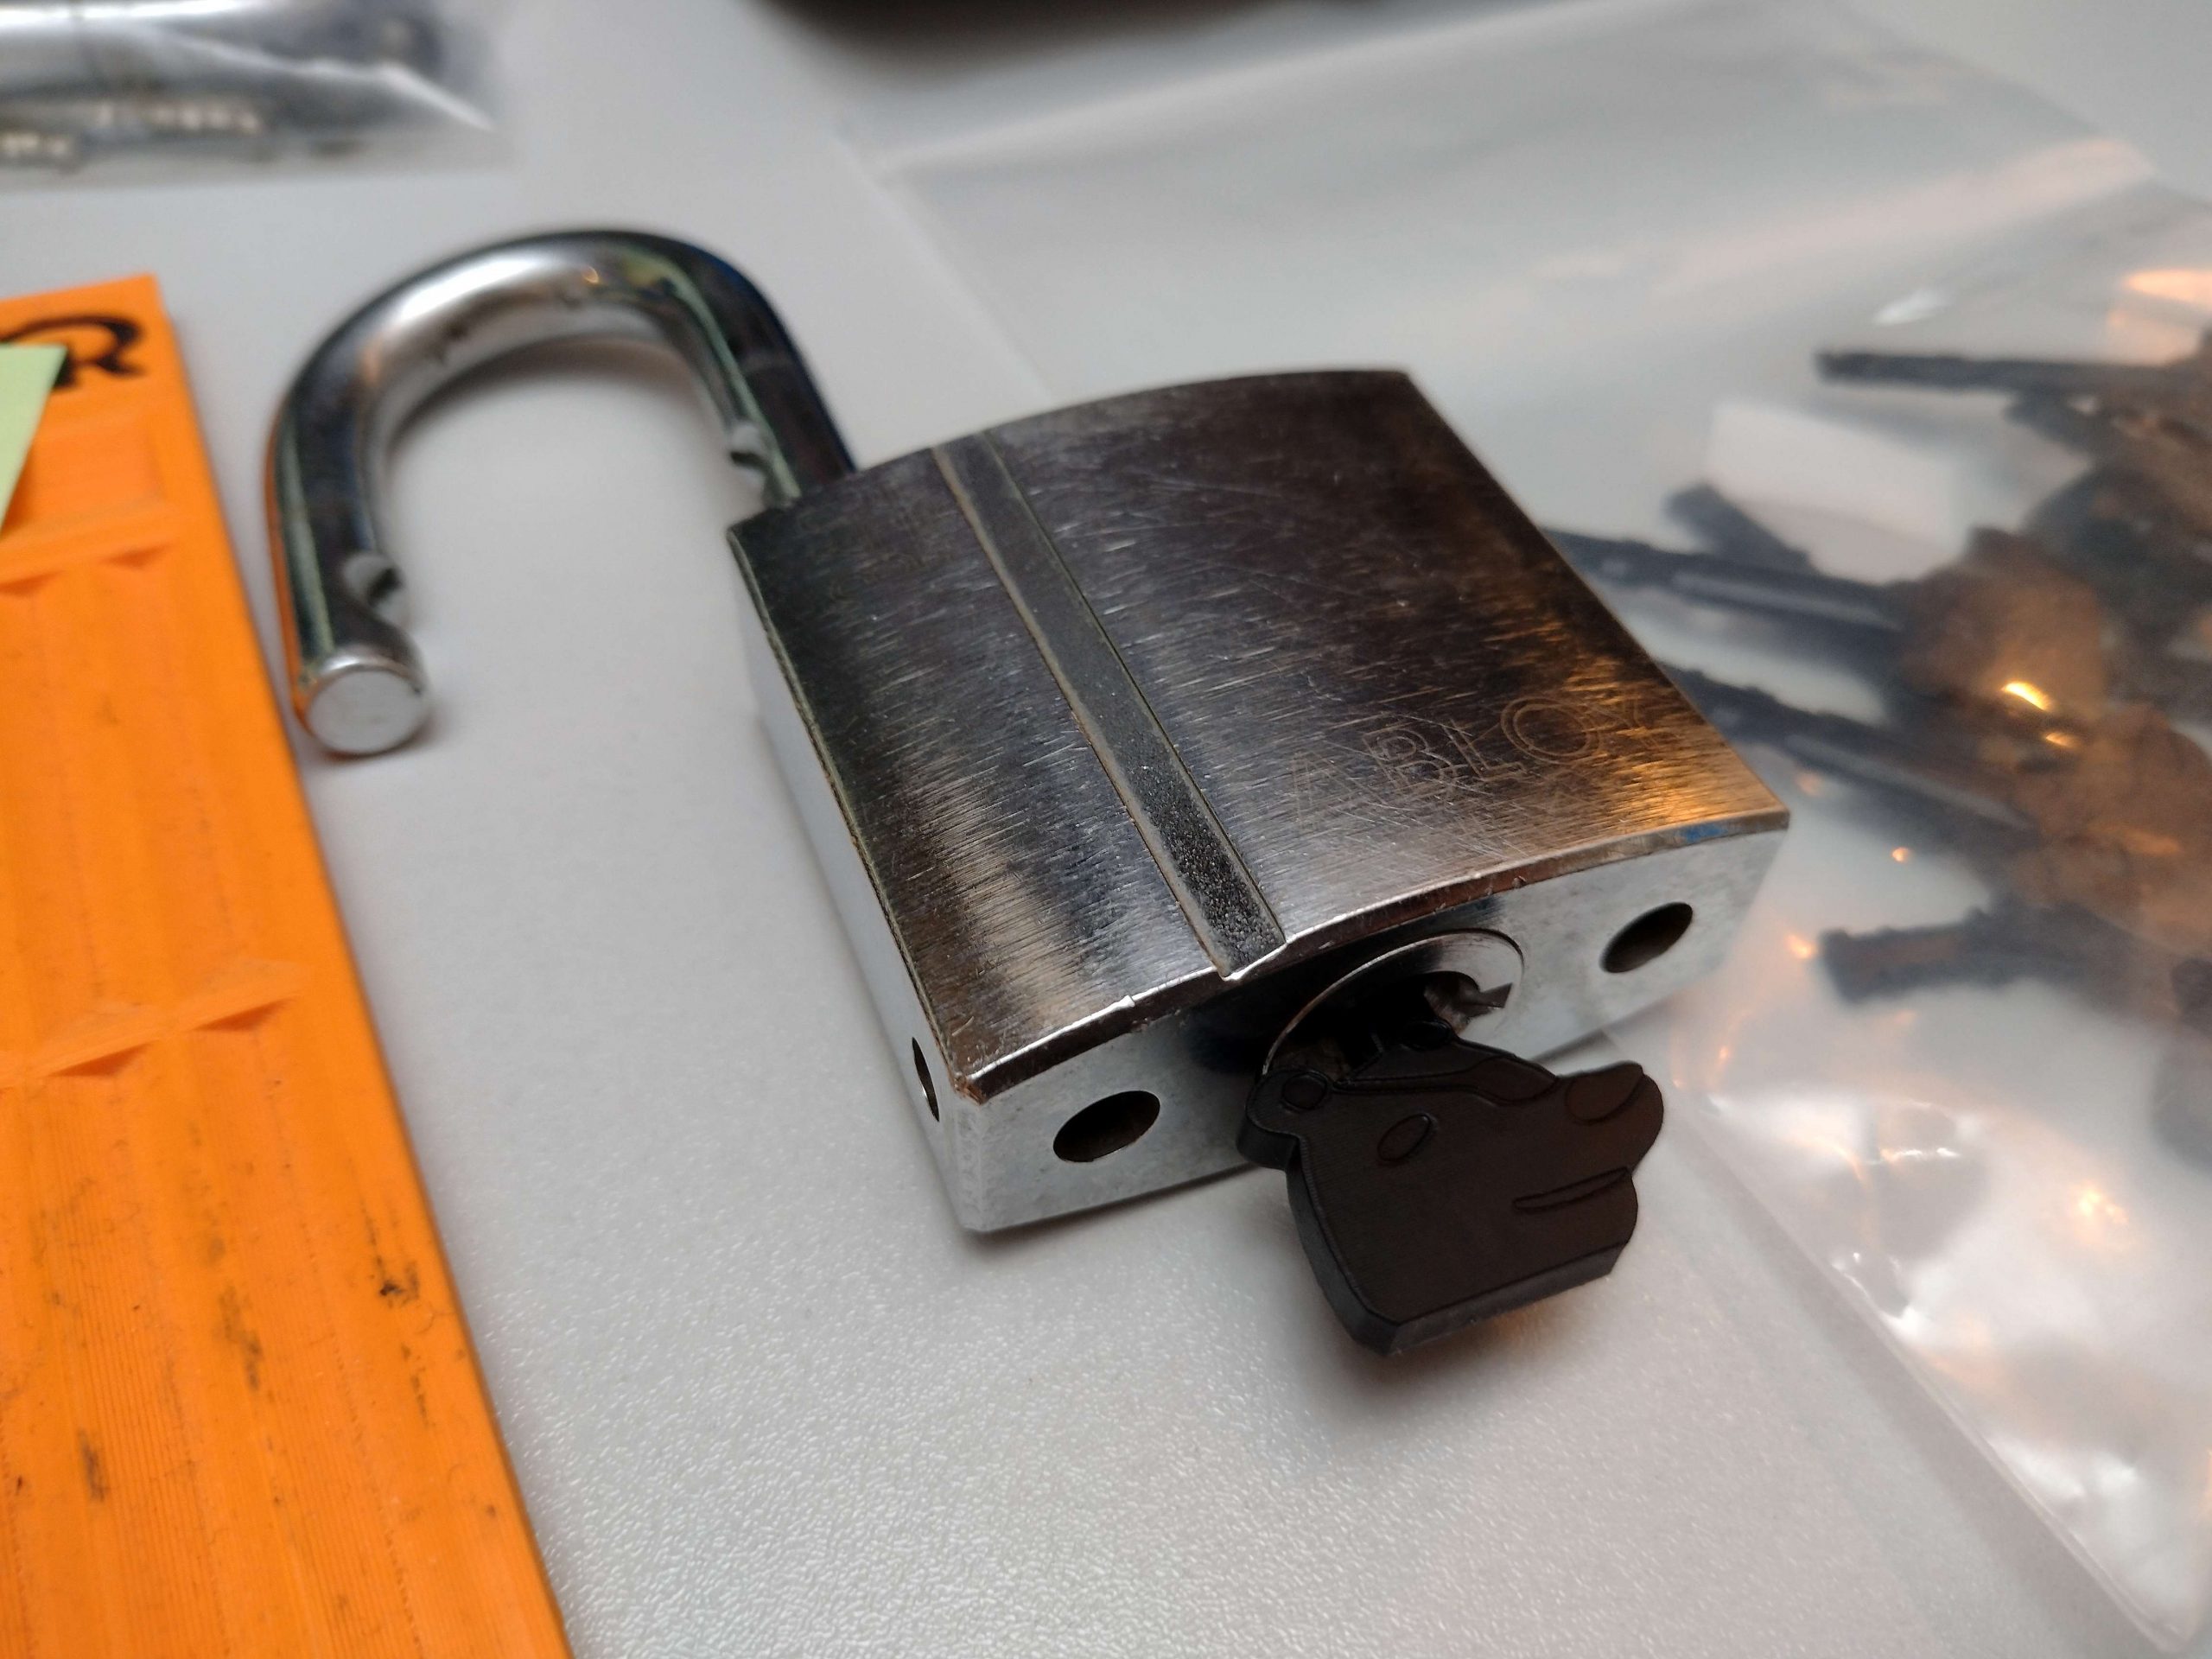 Locksport: A Hackers Guide to Lockpicking, Impressioning, and Safe Cracking  » Let Me Read